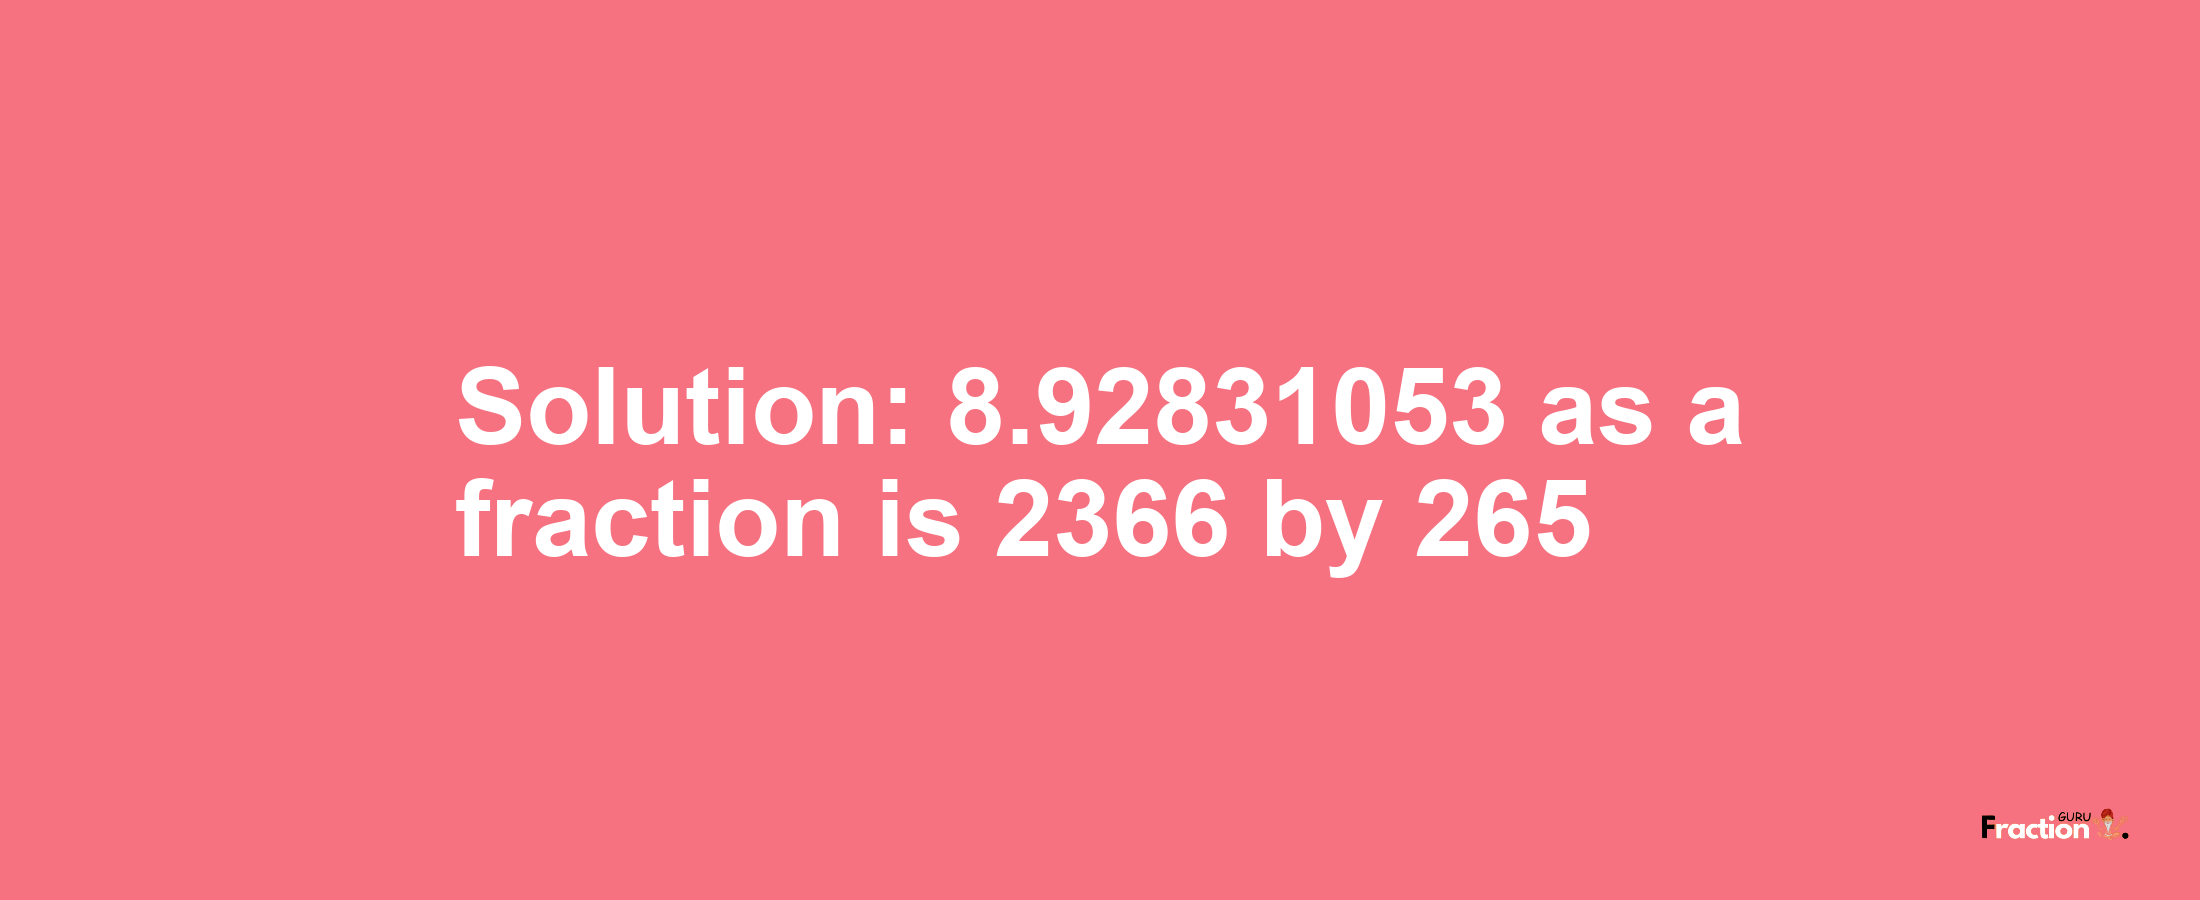 Solution:8.92831053 as a fraction is 2366/265